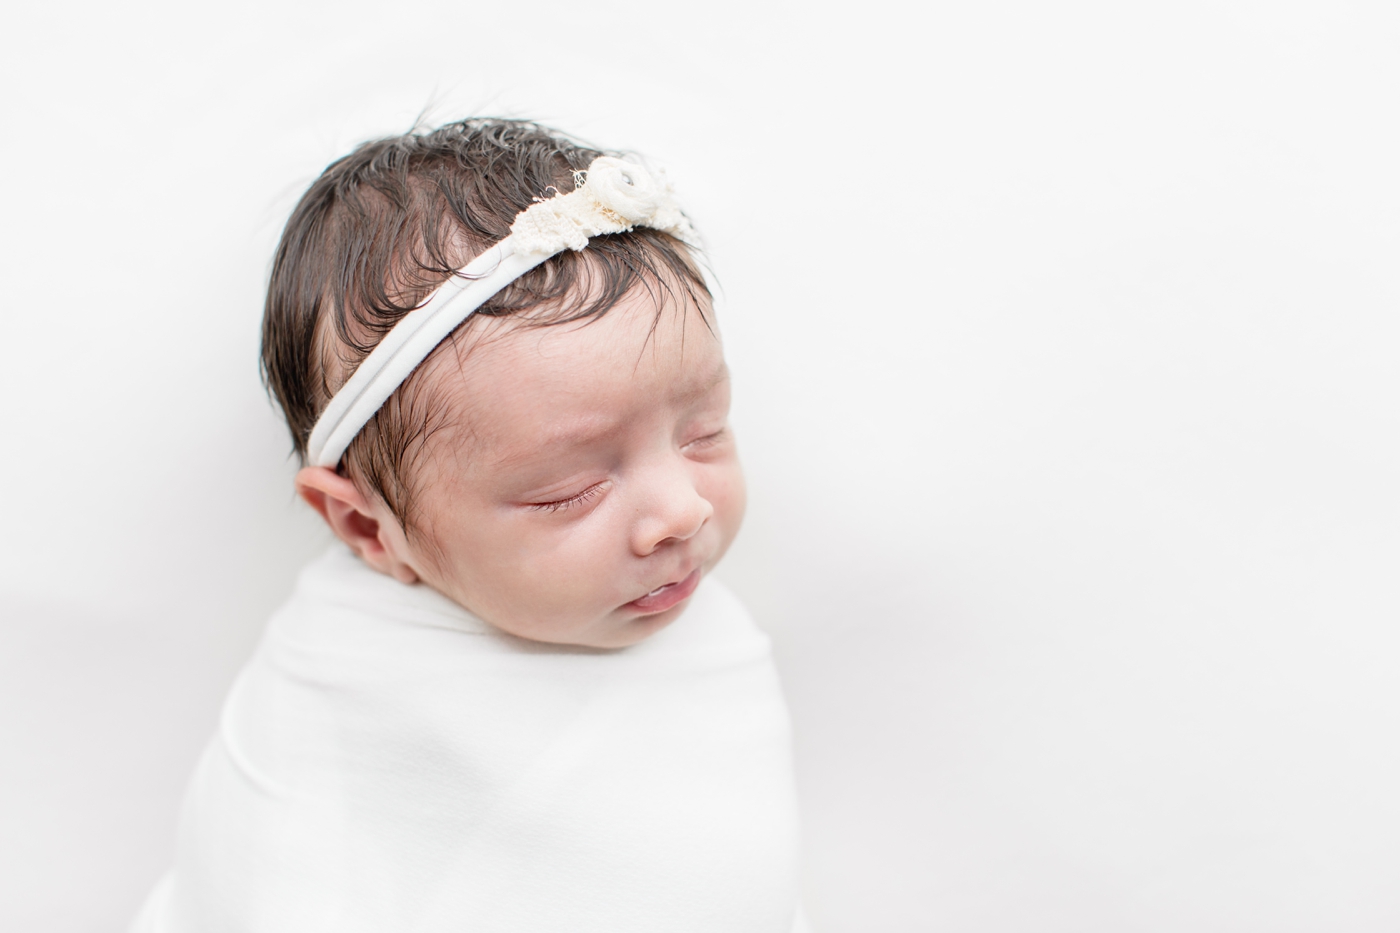 Close up of baby girl in white swaddle during newborn session. Photo by Sana Ahmed Photography